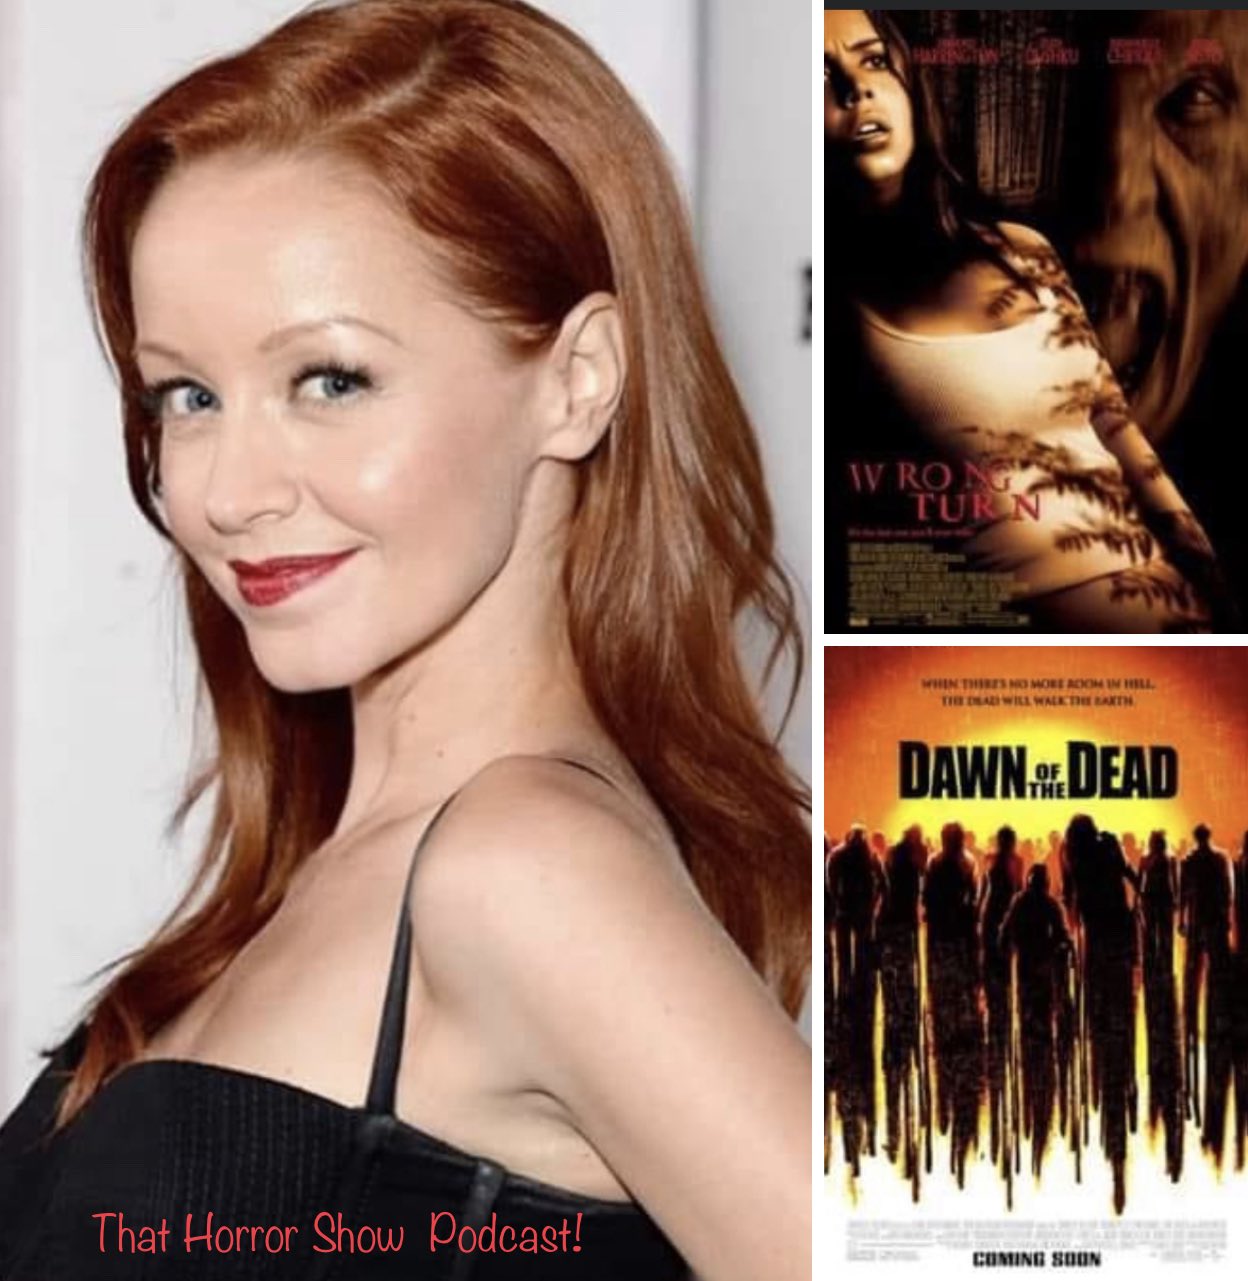 Happy Birthday Lindy Booth
She turns 44 today 